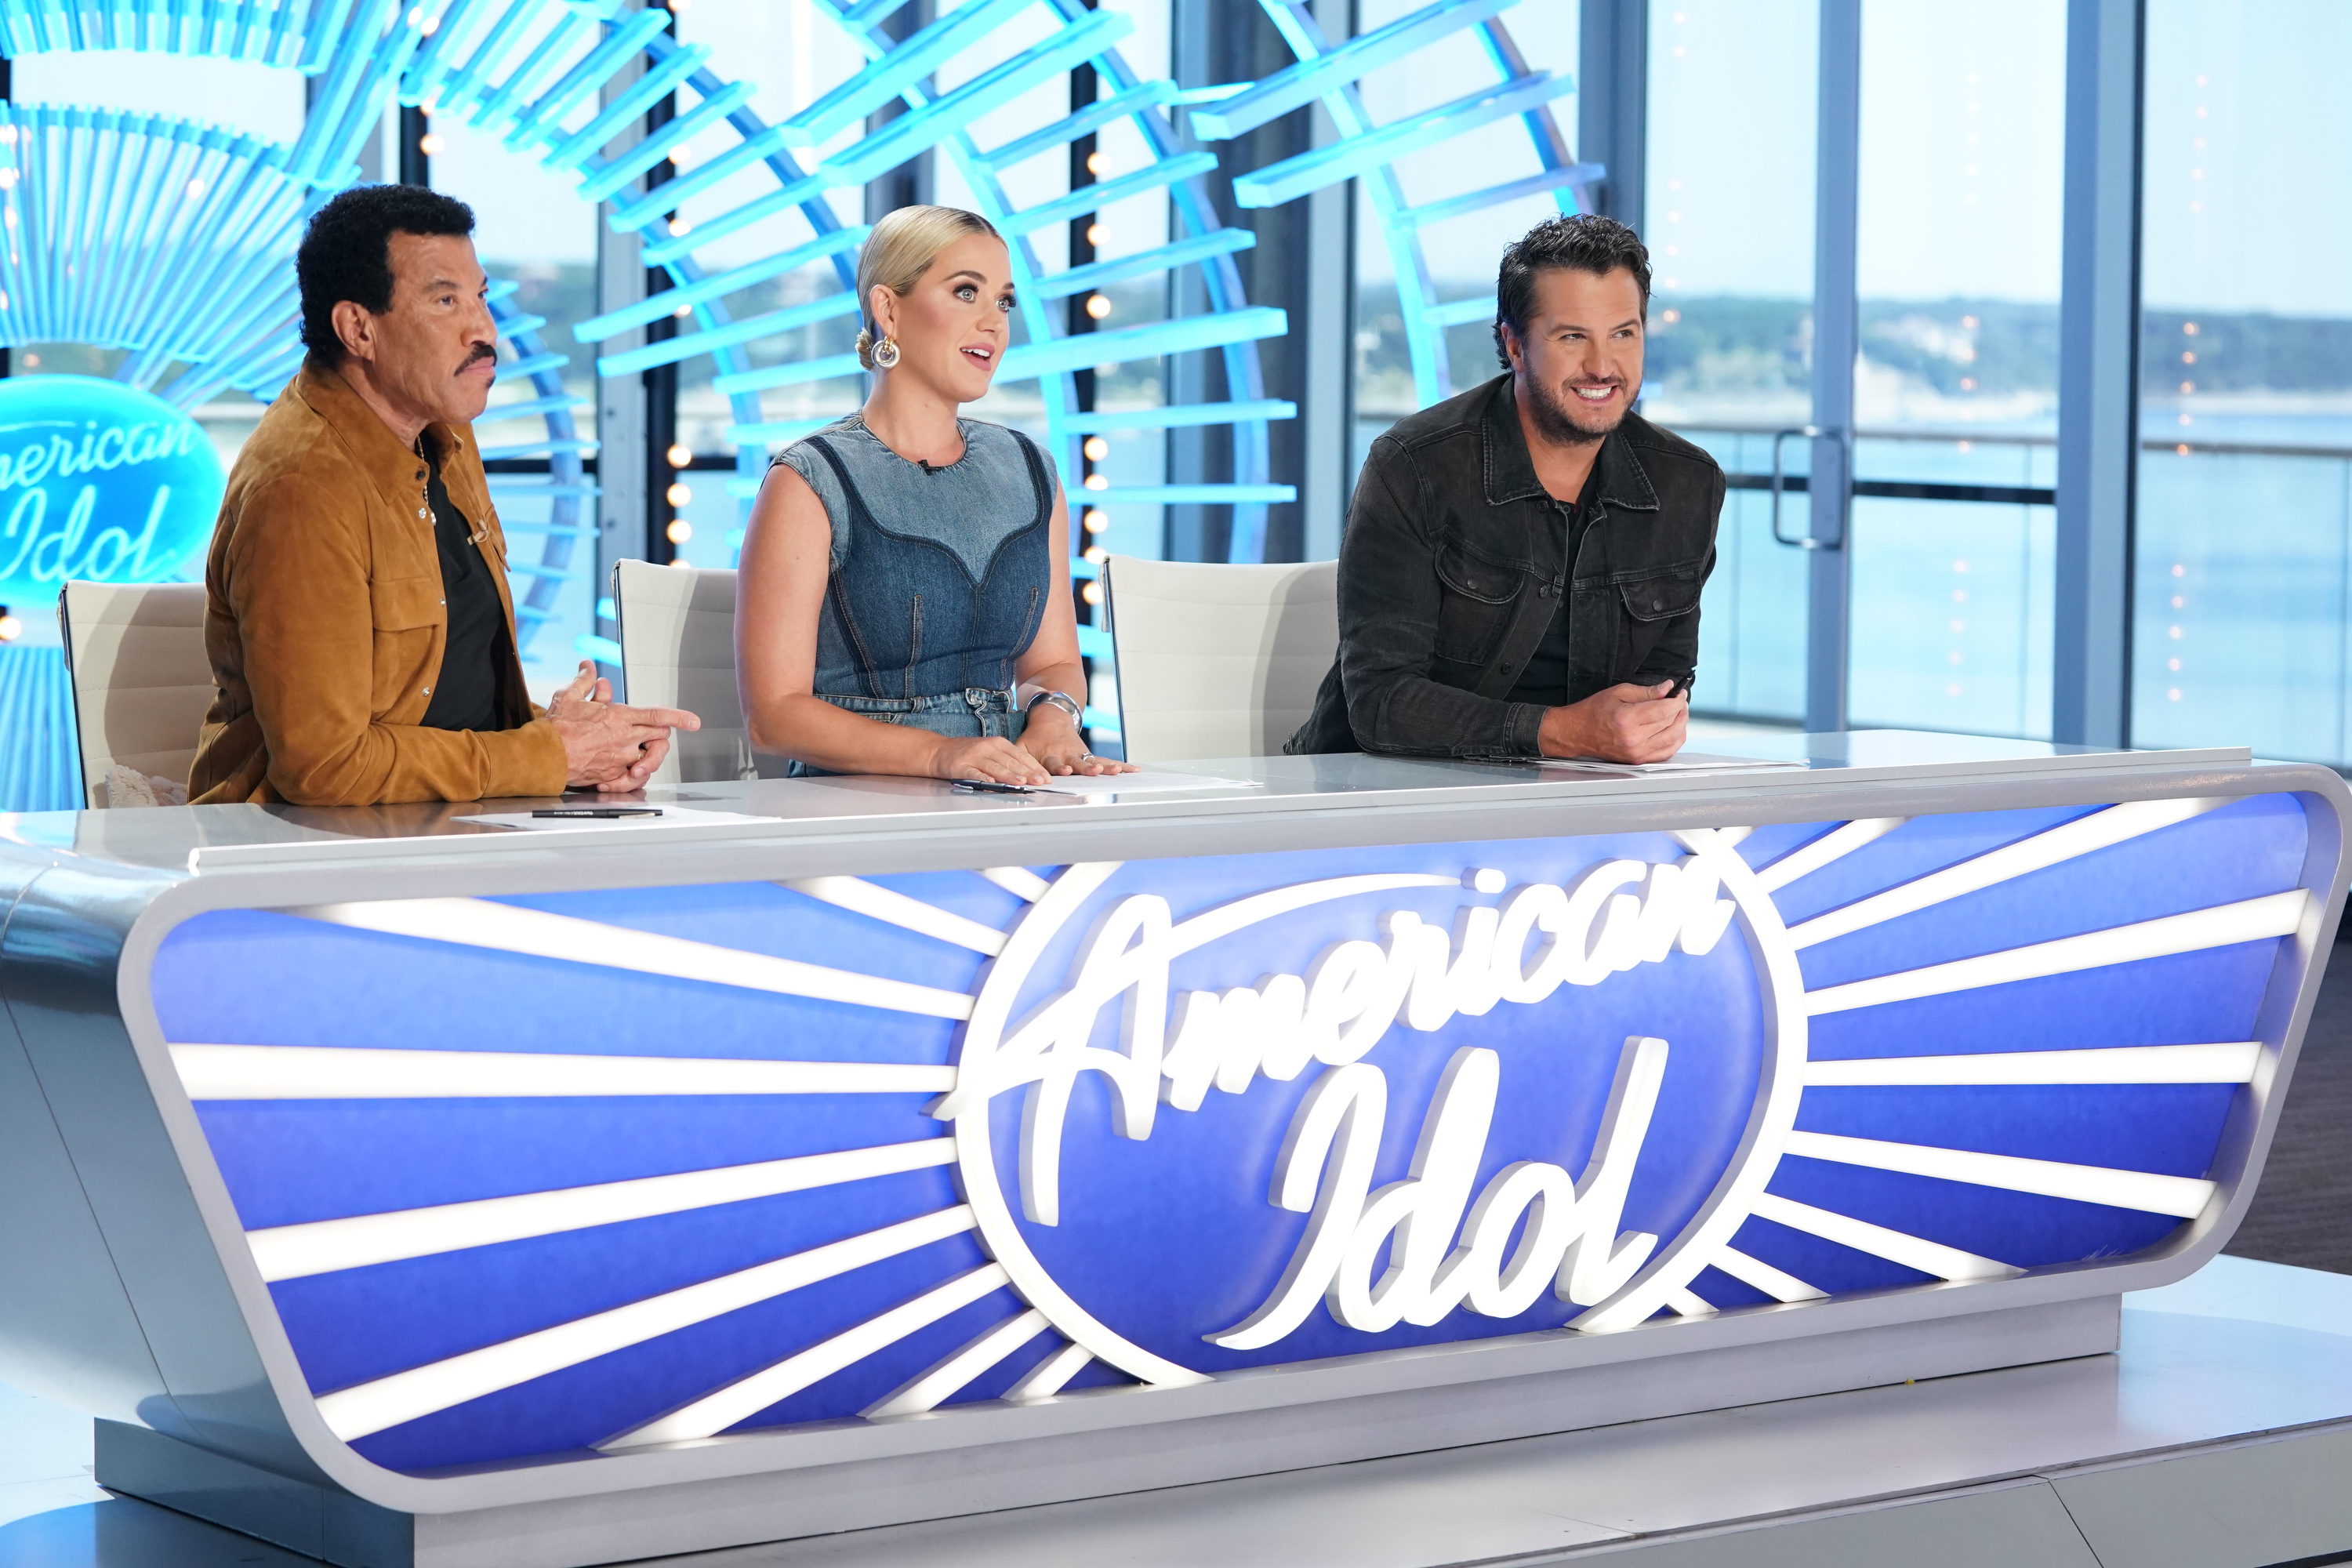 When Do the 'American Idol' Live Shows Start?